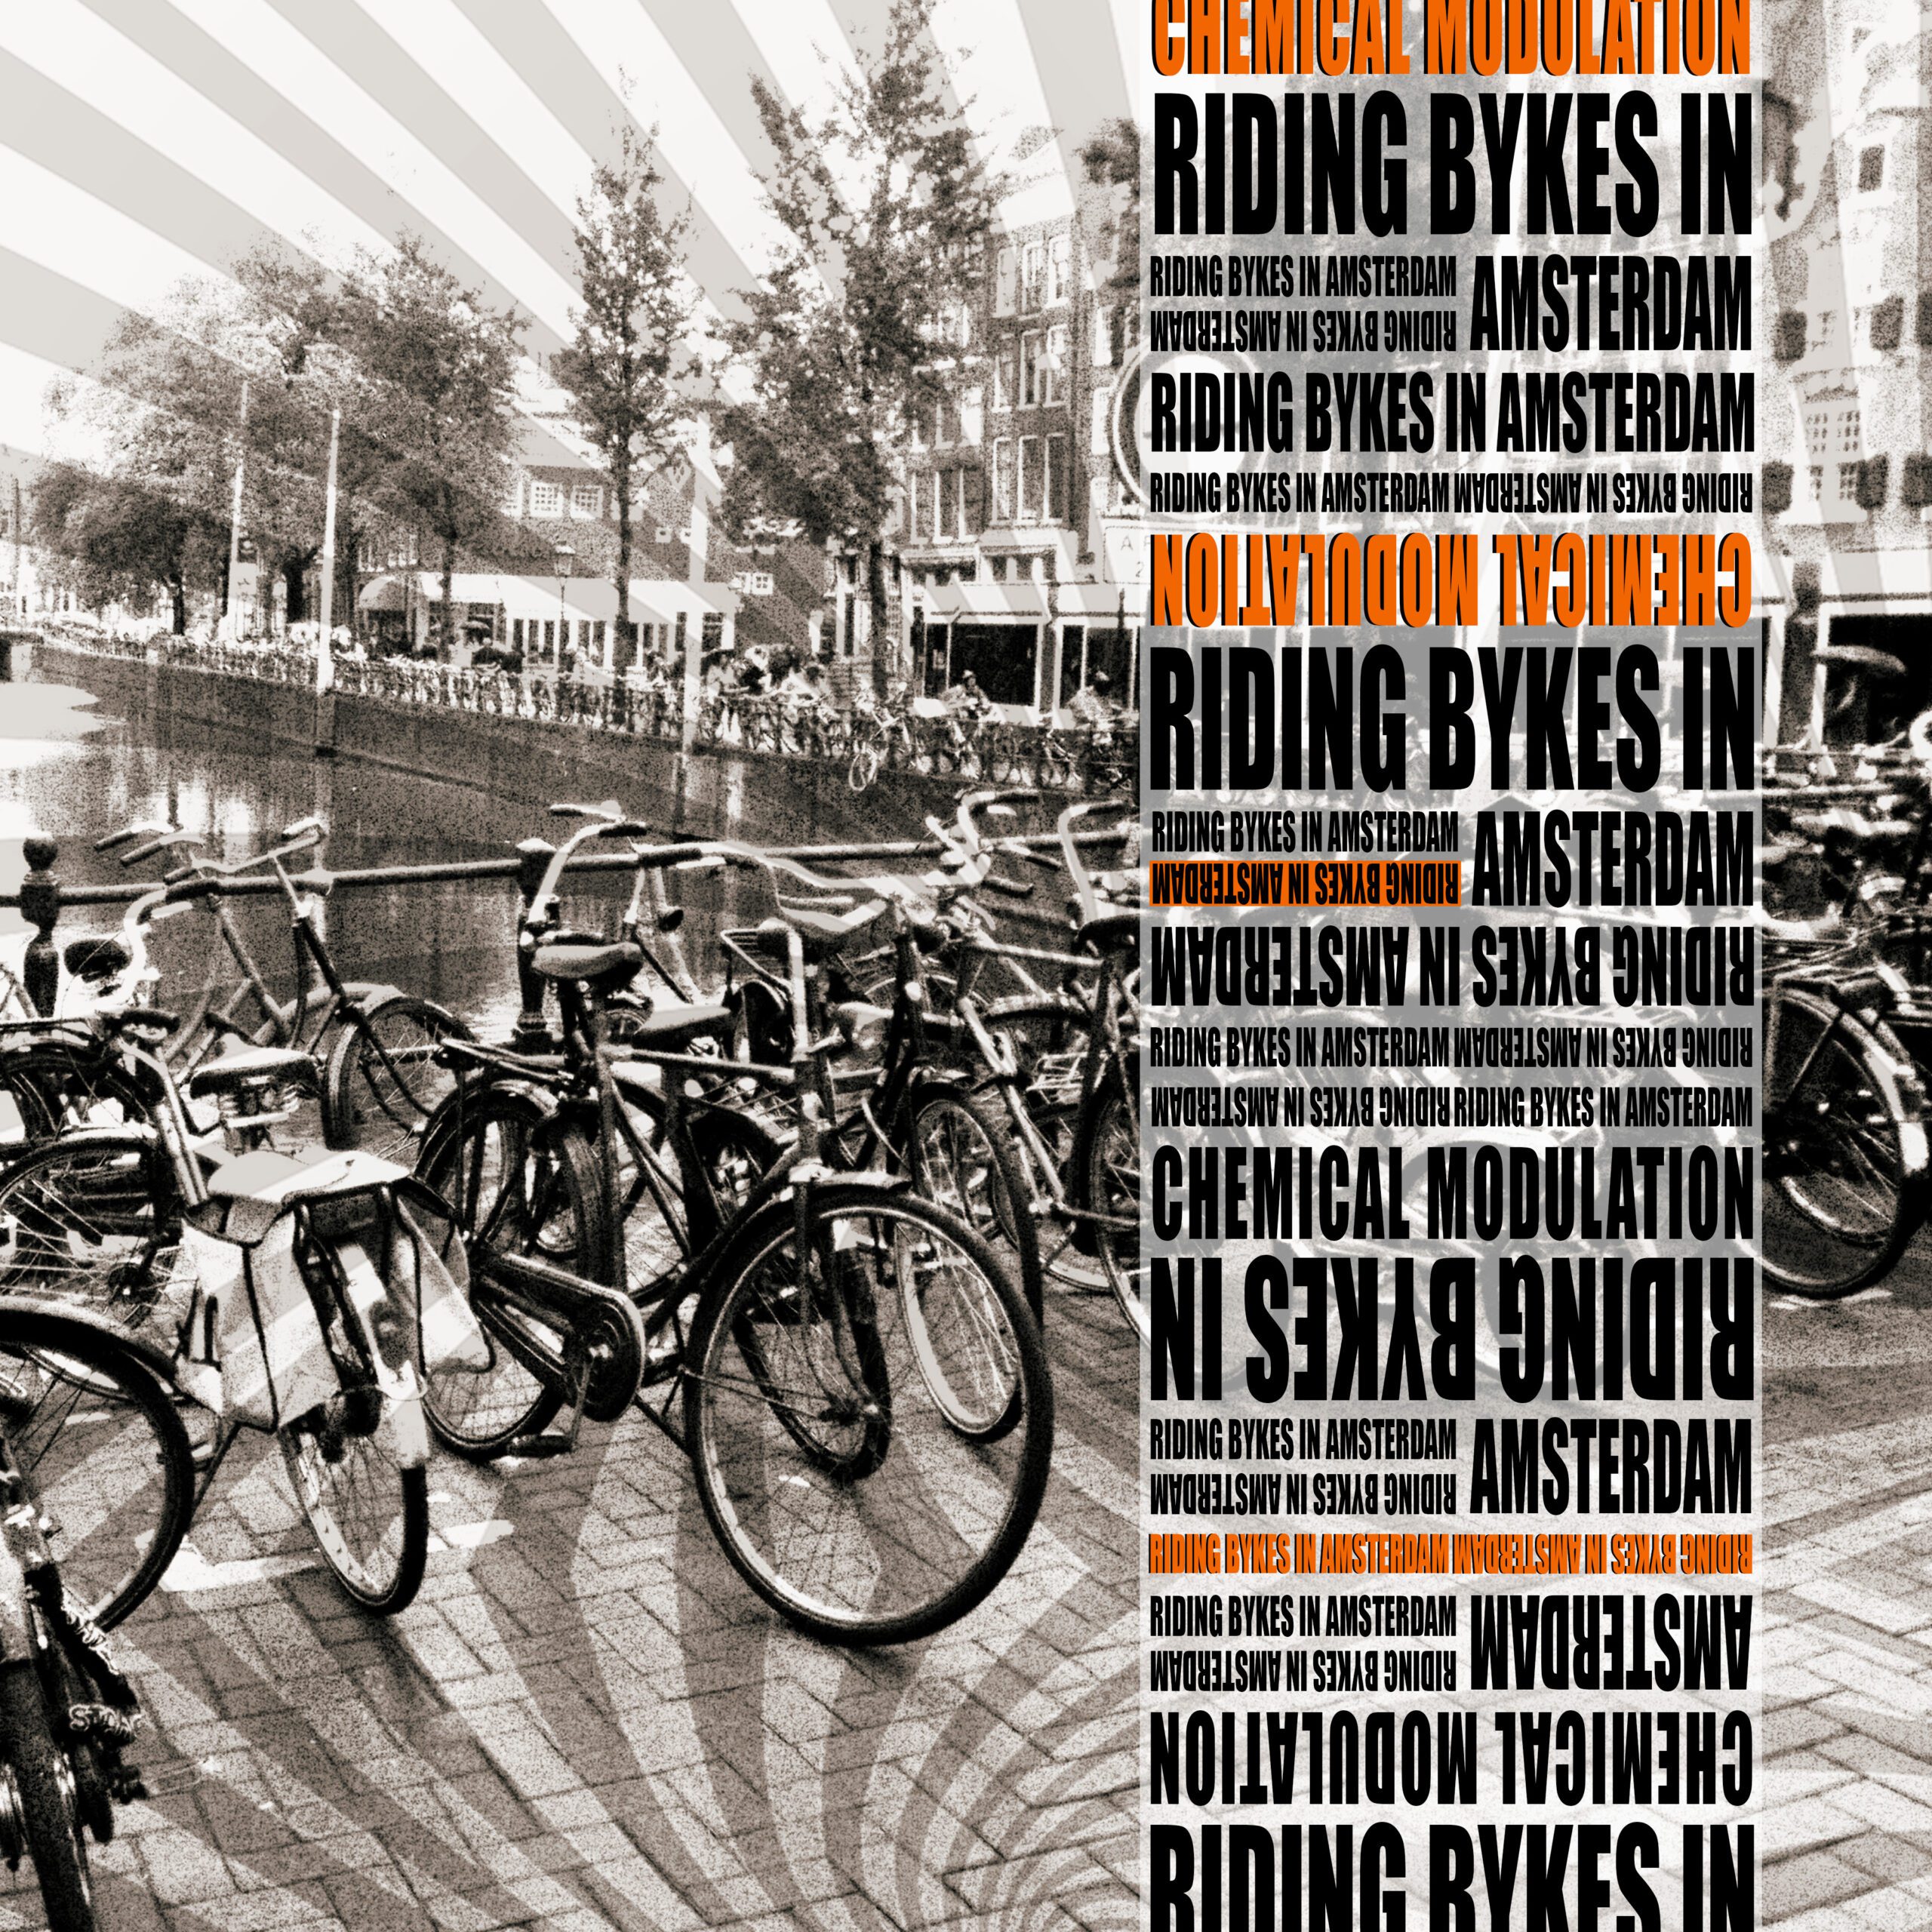 Riding Byke in Amsterdam (The Remix Collaboration)  is out !!!